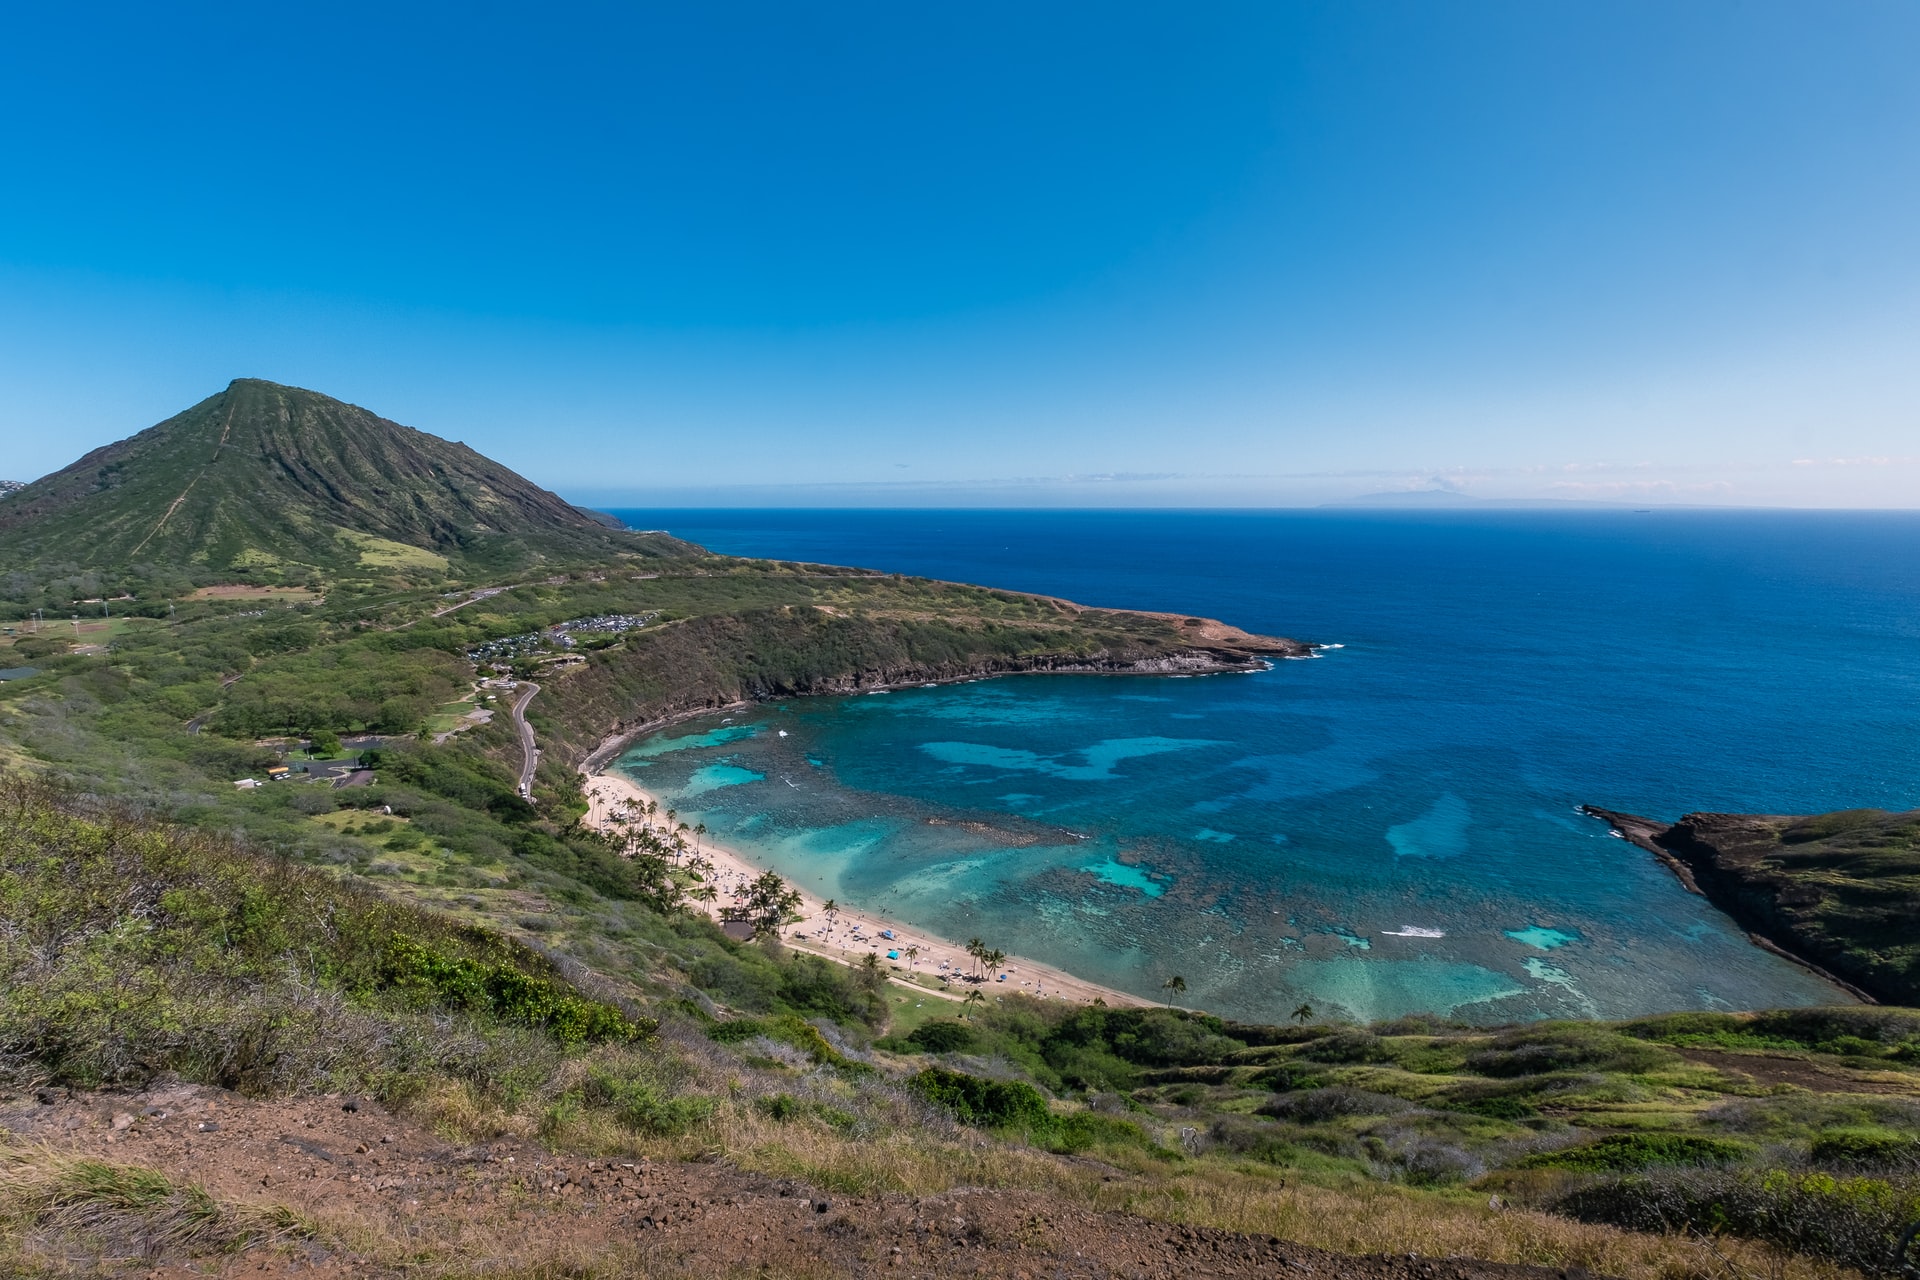 <p>Just being in Honolulu must be an amazing experience but going on a tour by the North Shore of the island and Hanauma Bay is, according to TripAdvisor users, a breathtaking experience.</p> <p>Image: Unsplash - Amanda Phung</p>